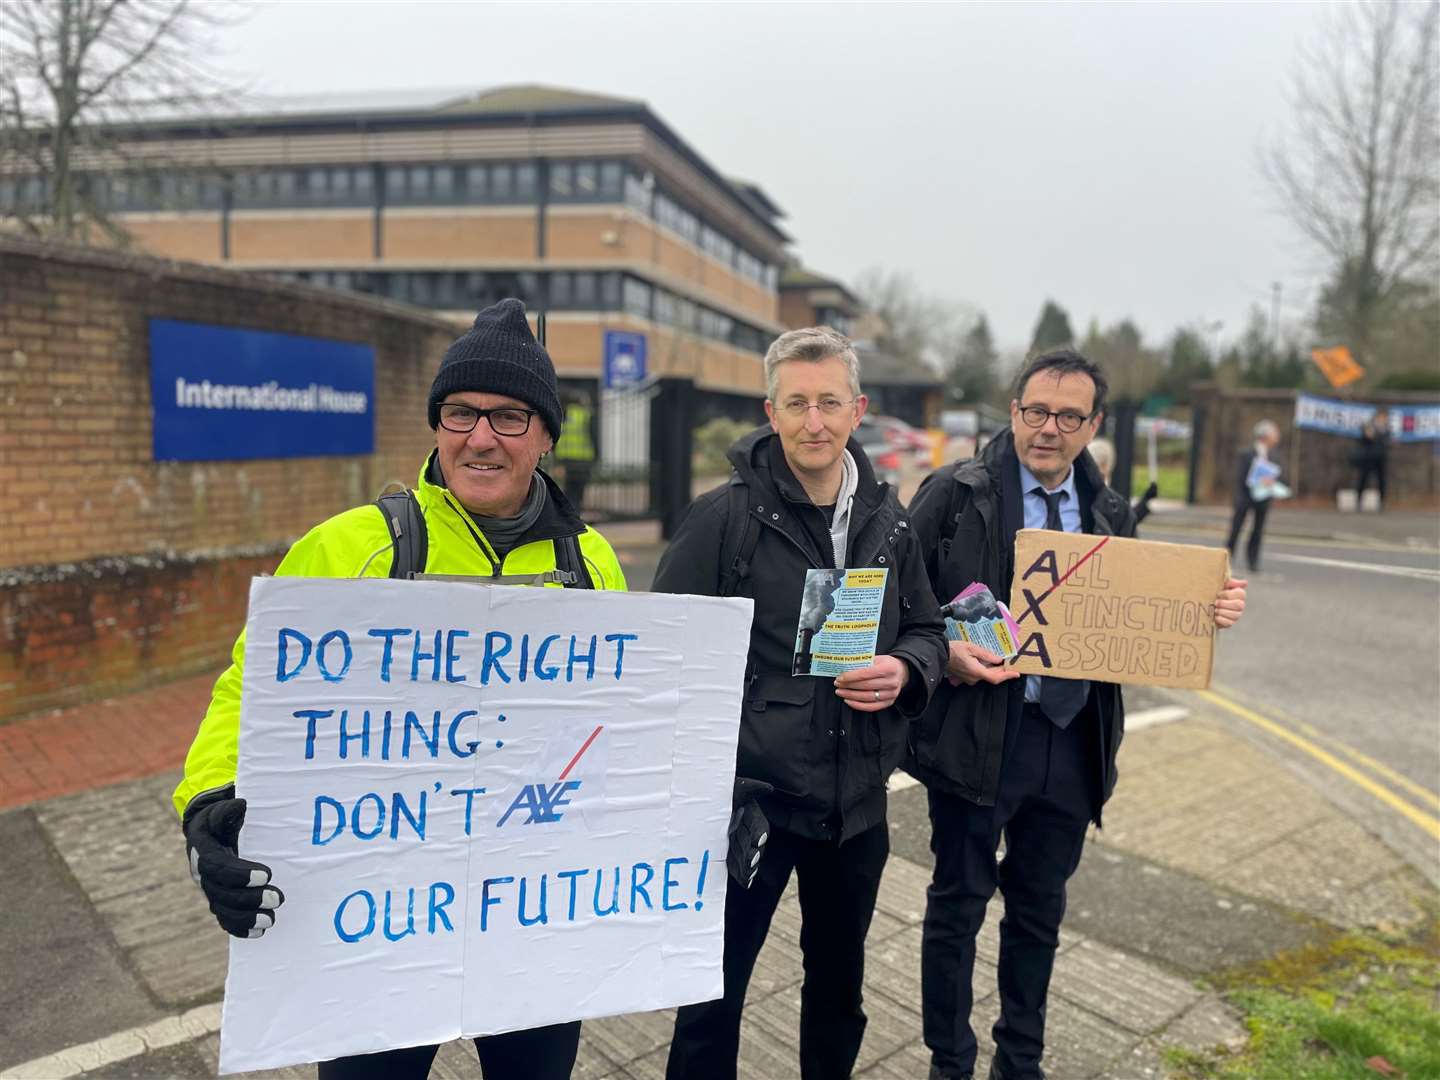 The protesters held up placards and handed out flyers to employees. Picture: XR Tunbridge Wells